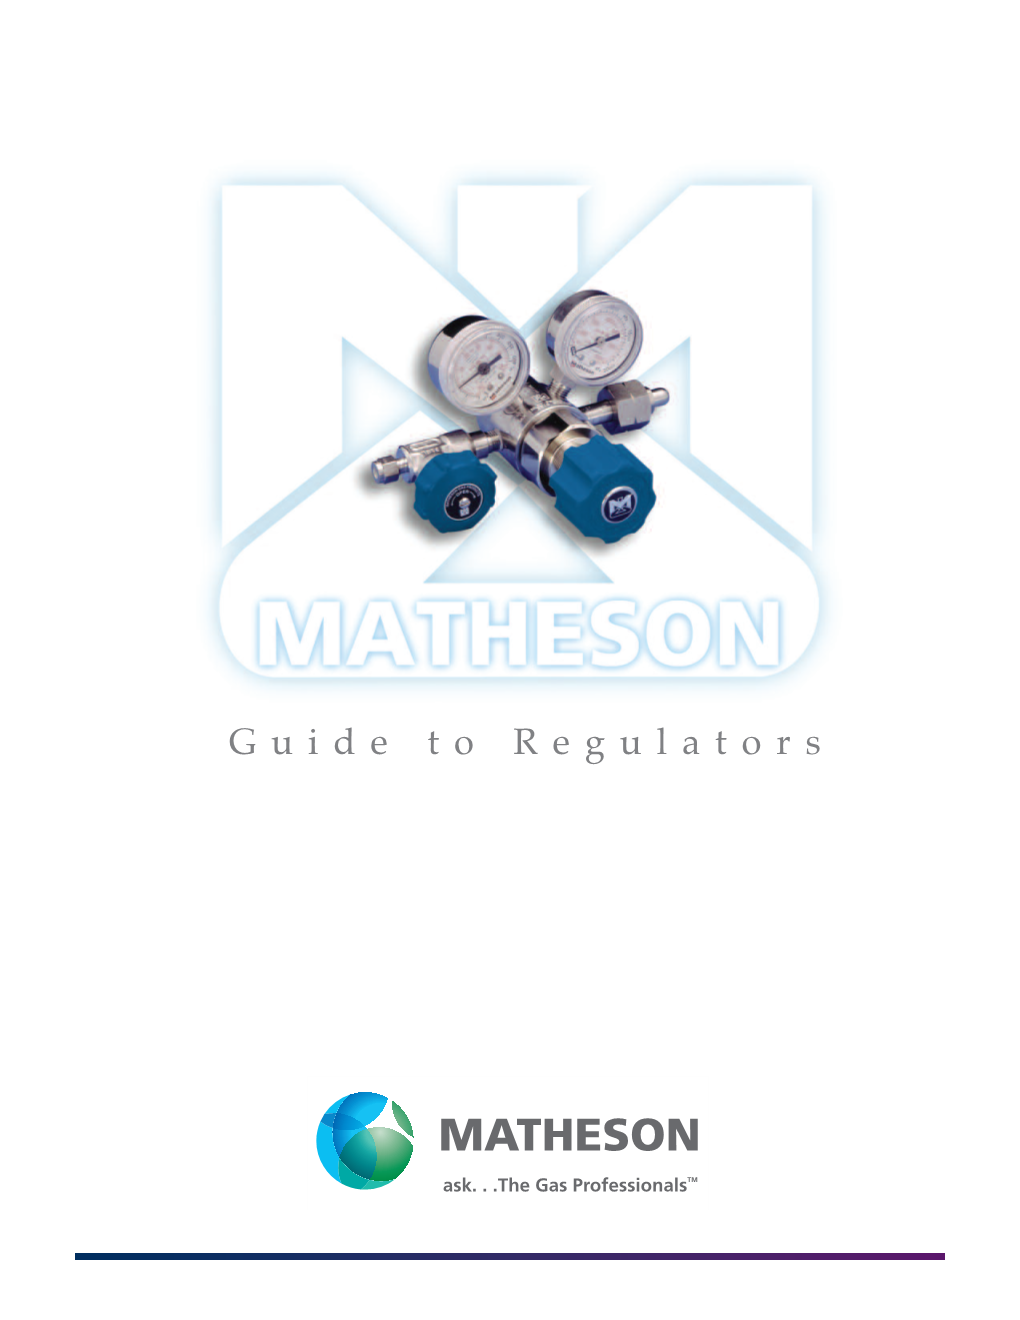 Guide to Regulators Table of Contents